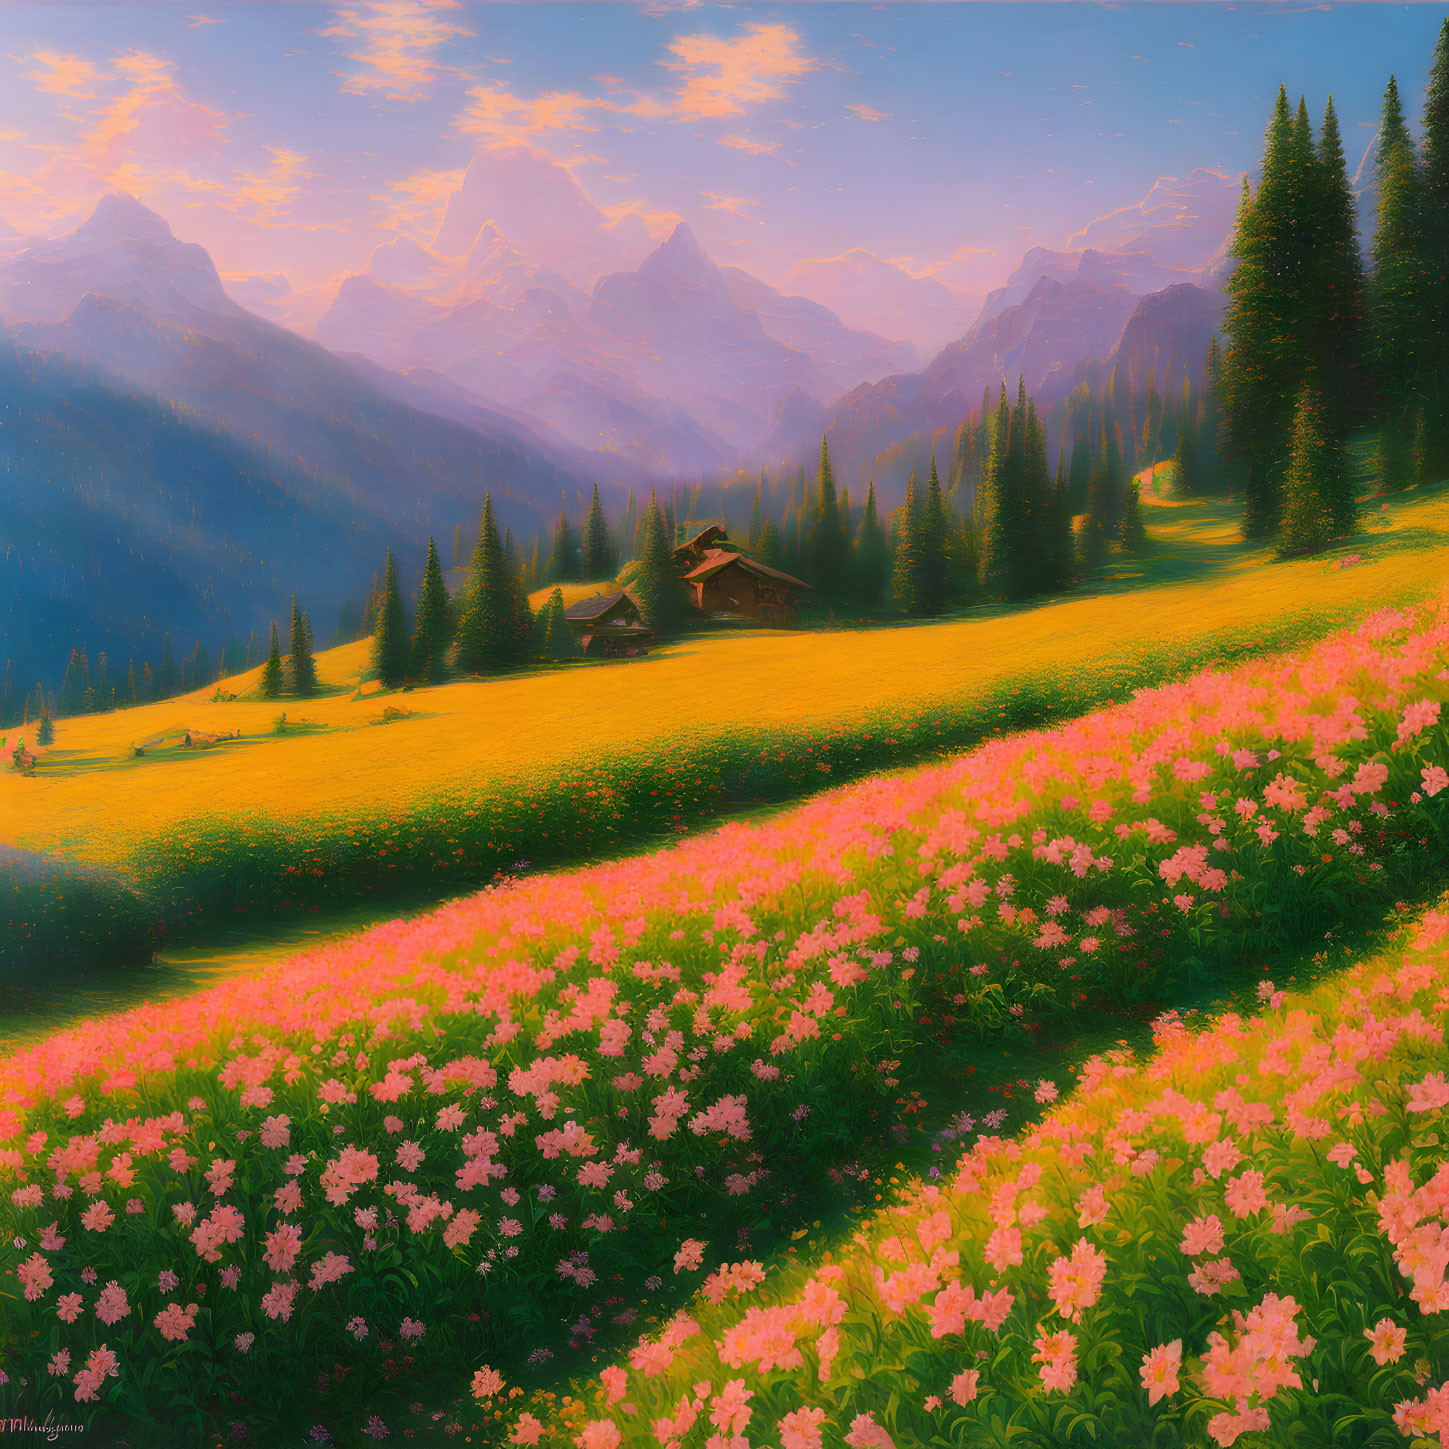 Scenic landscape with pink flowers, cabin, pine trees, and mountains